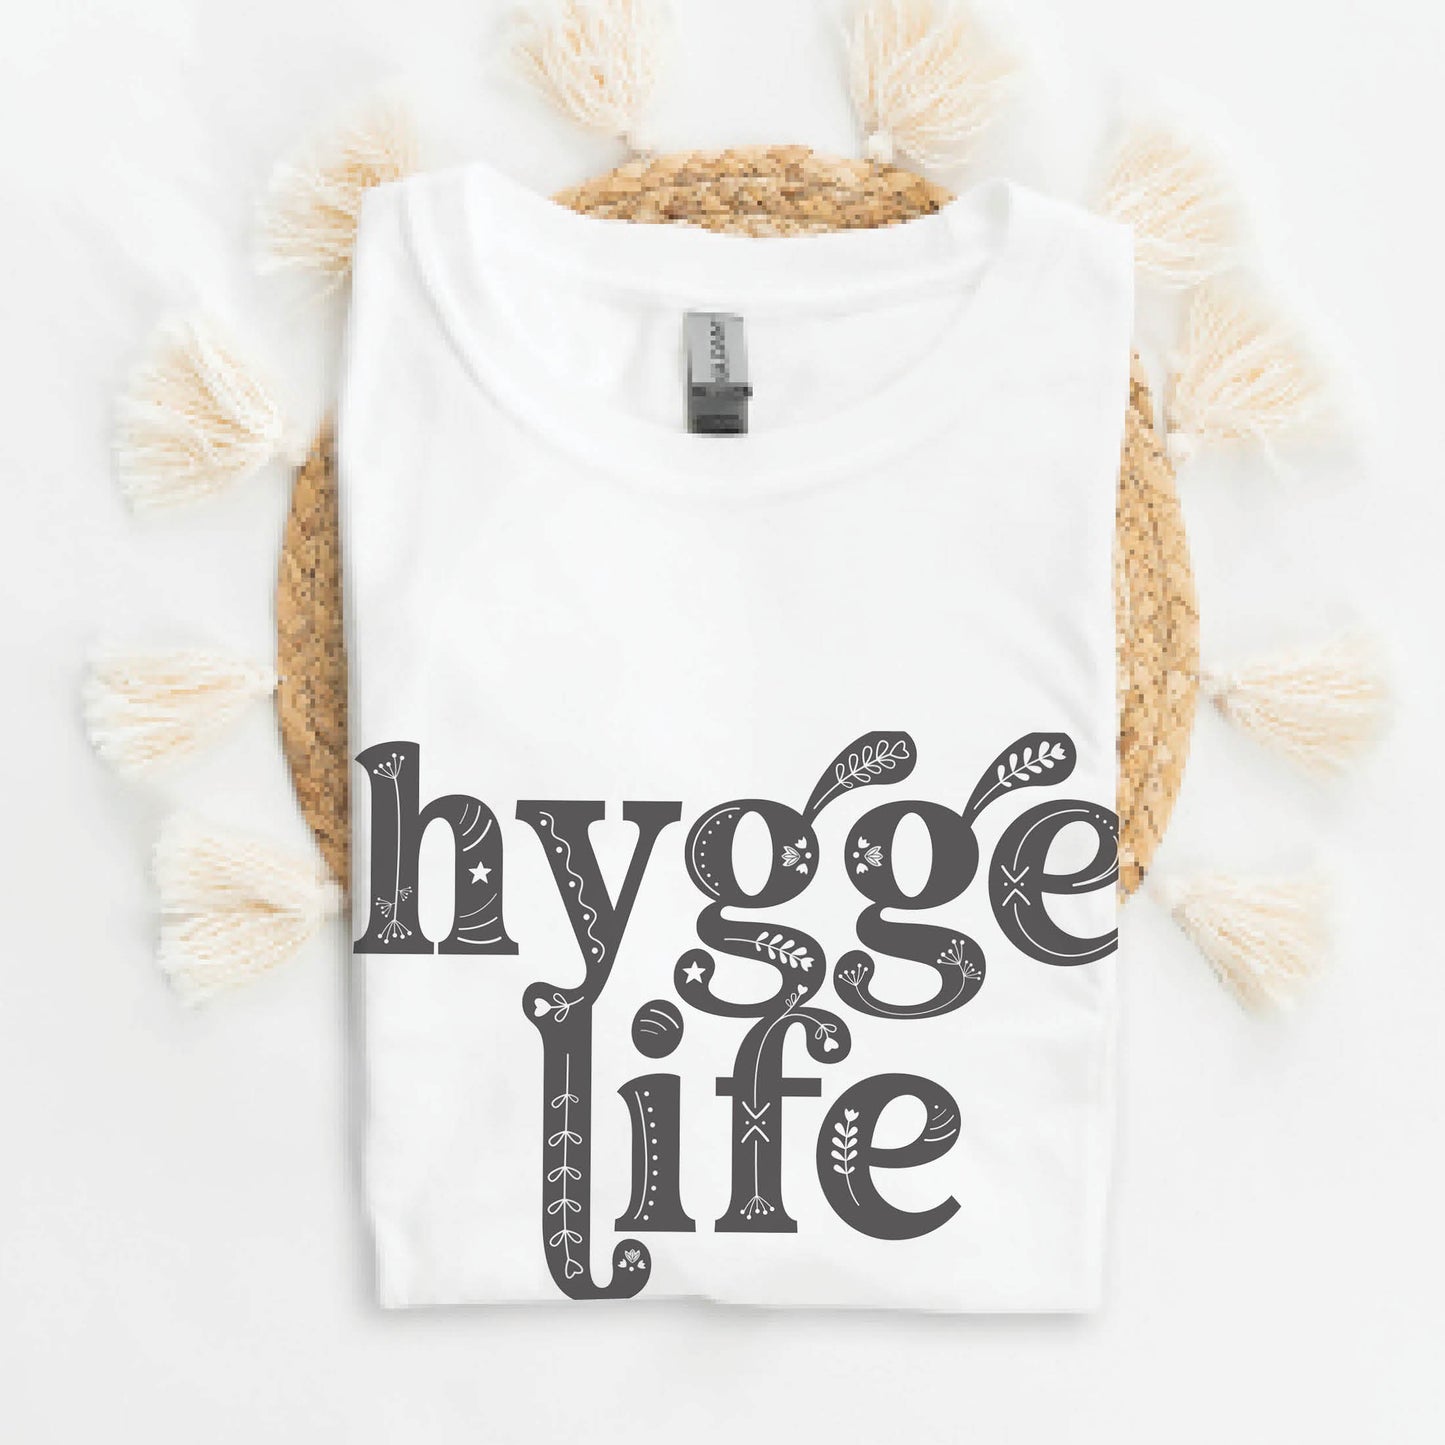 Coziness vibes boho white and gray Hygge Life Holy Hygge Women's unisex Christian t-shirt with Scandinavian floral and heart art for the cozy fall and winter season